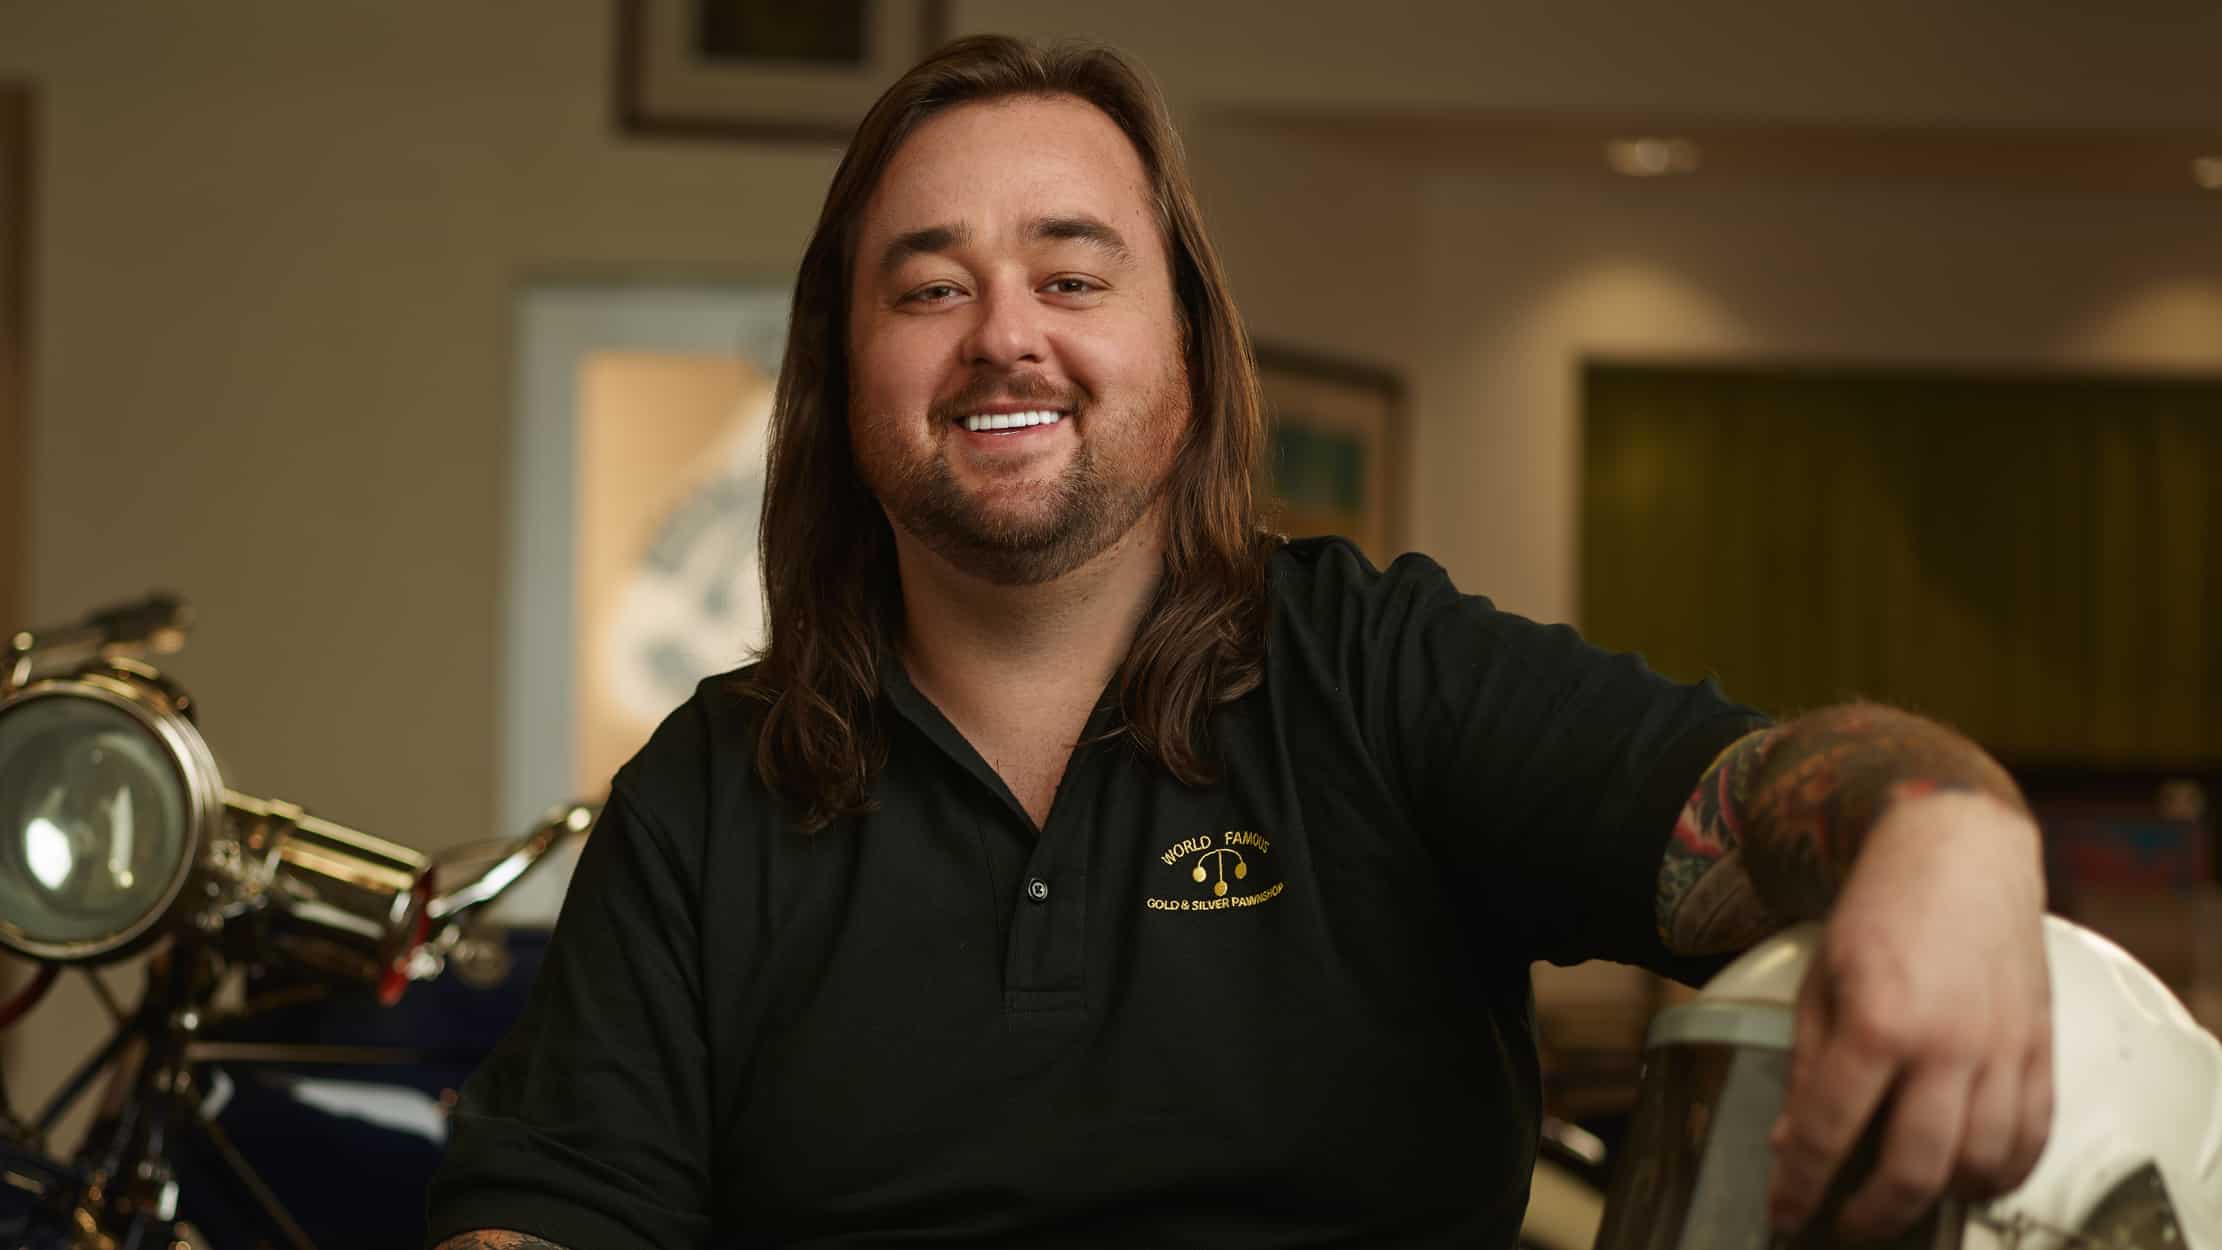 Image of Chumlee as a known businessman